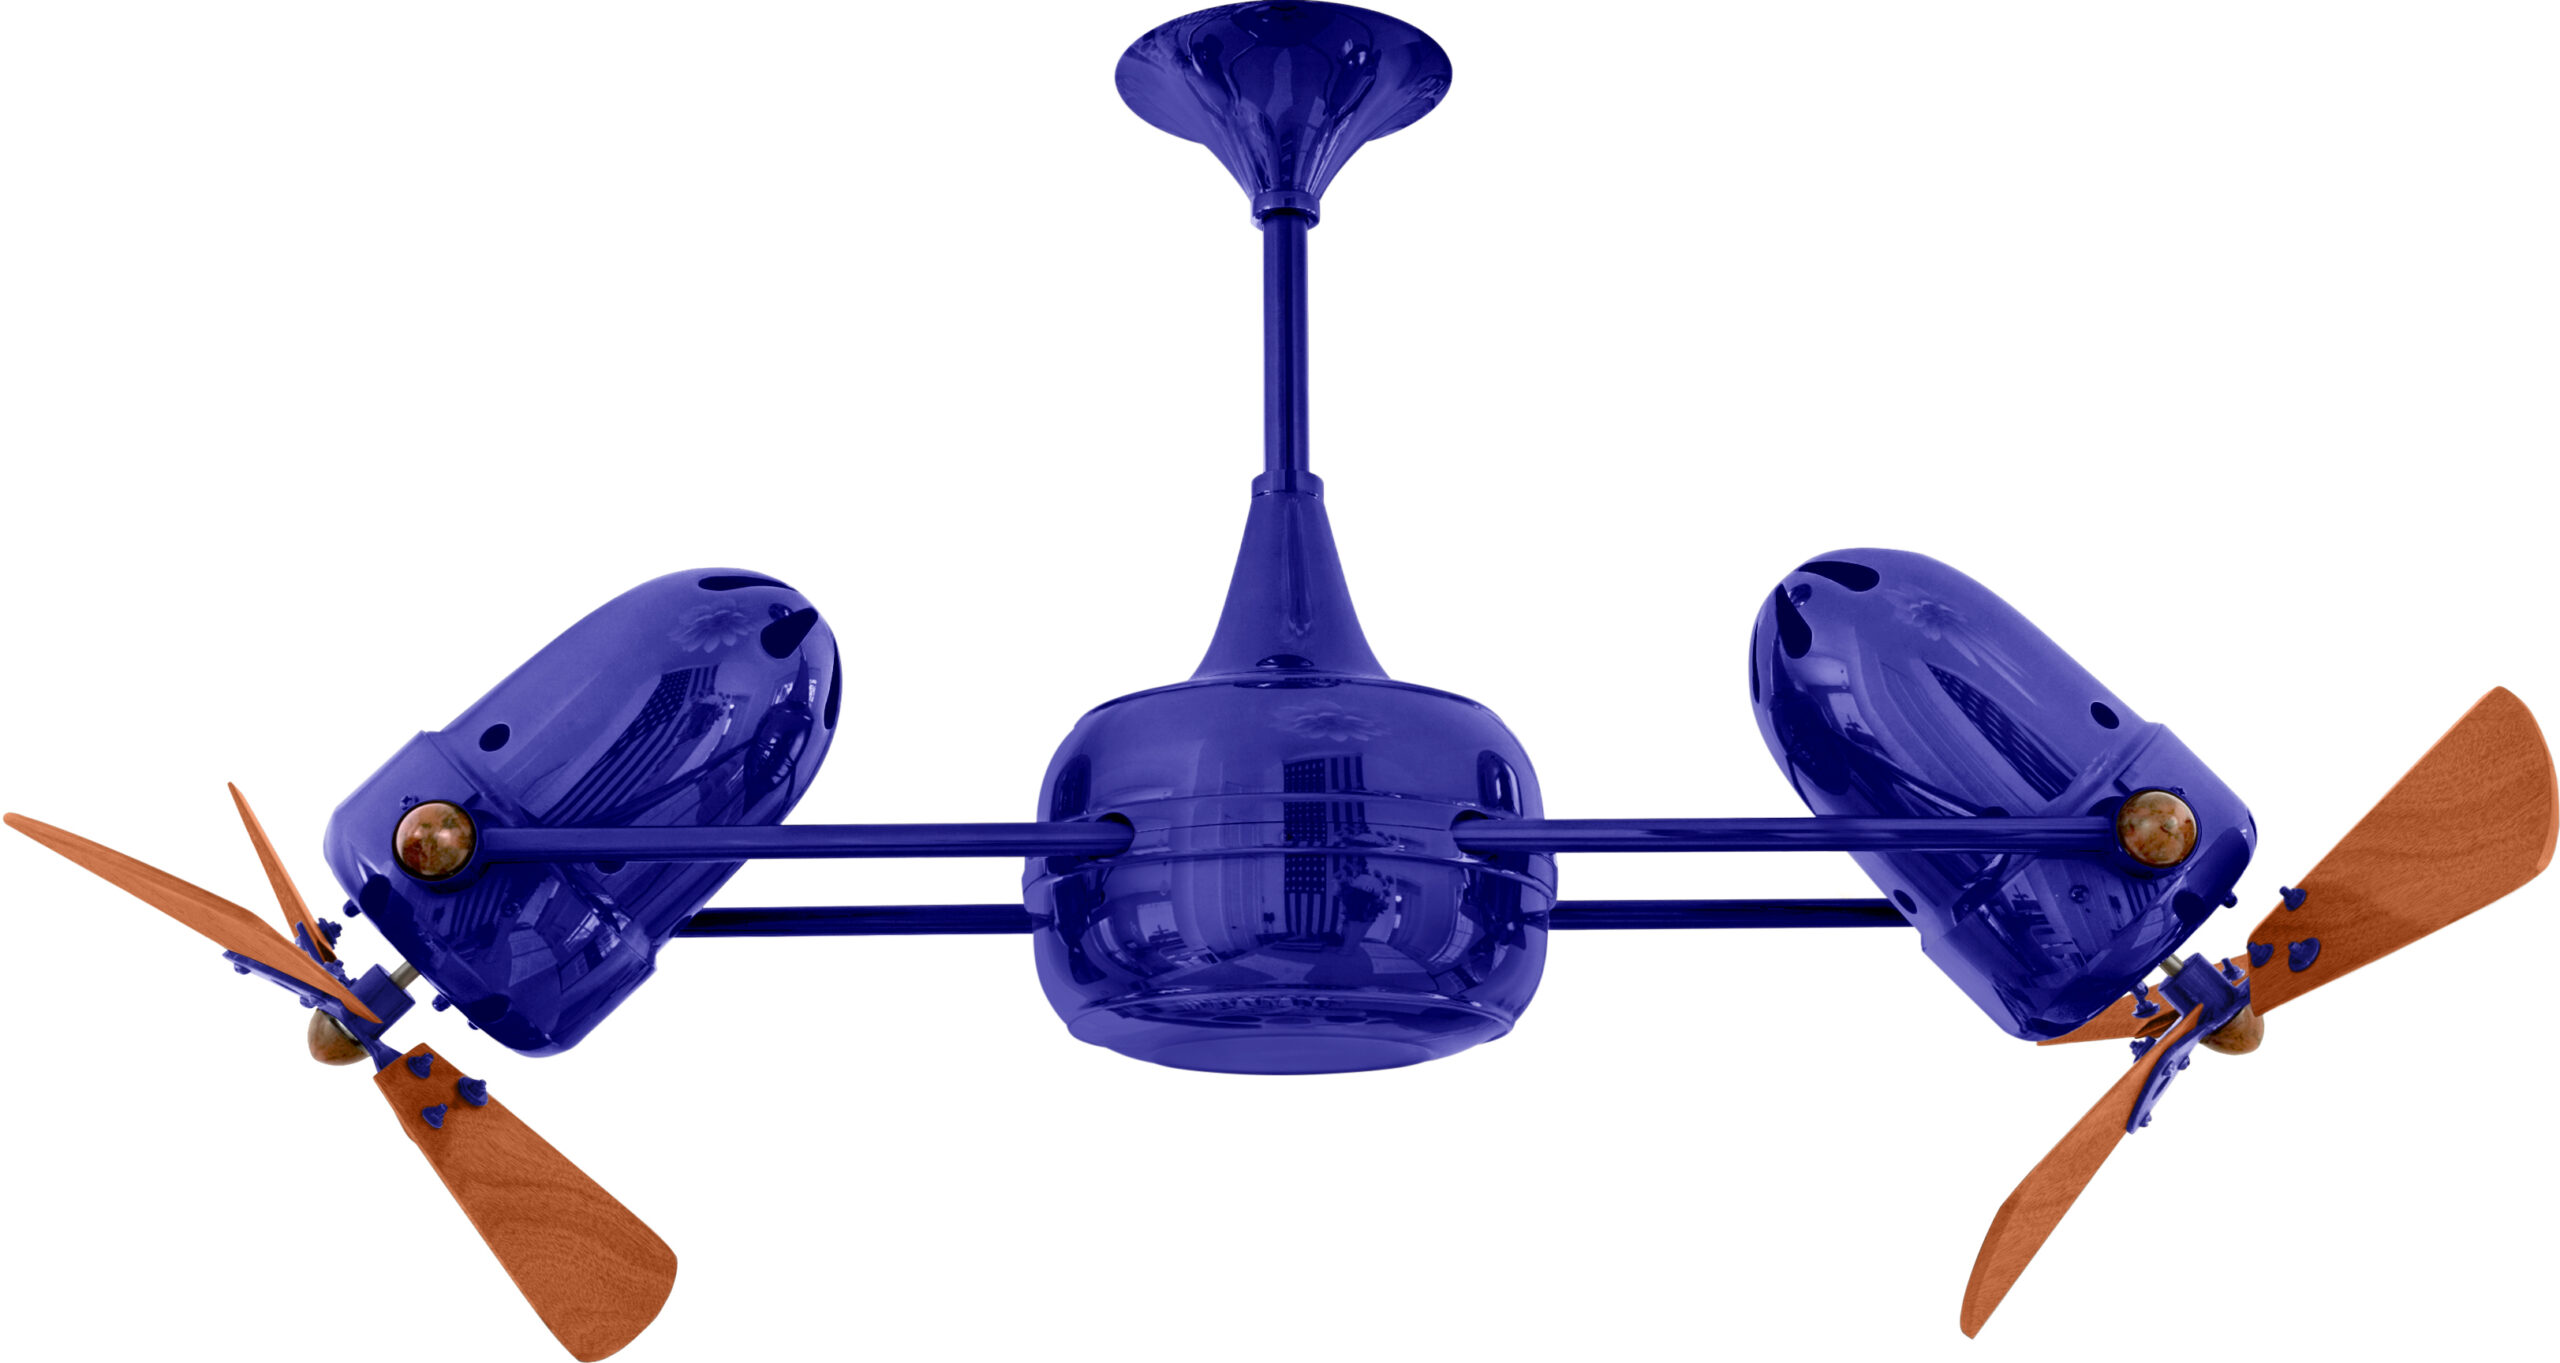 Duplo Dinamico rotational dual head ceiling fan in blue / safira finish with solid mahogany wood blades made by Matthews Fan Company.